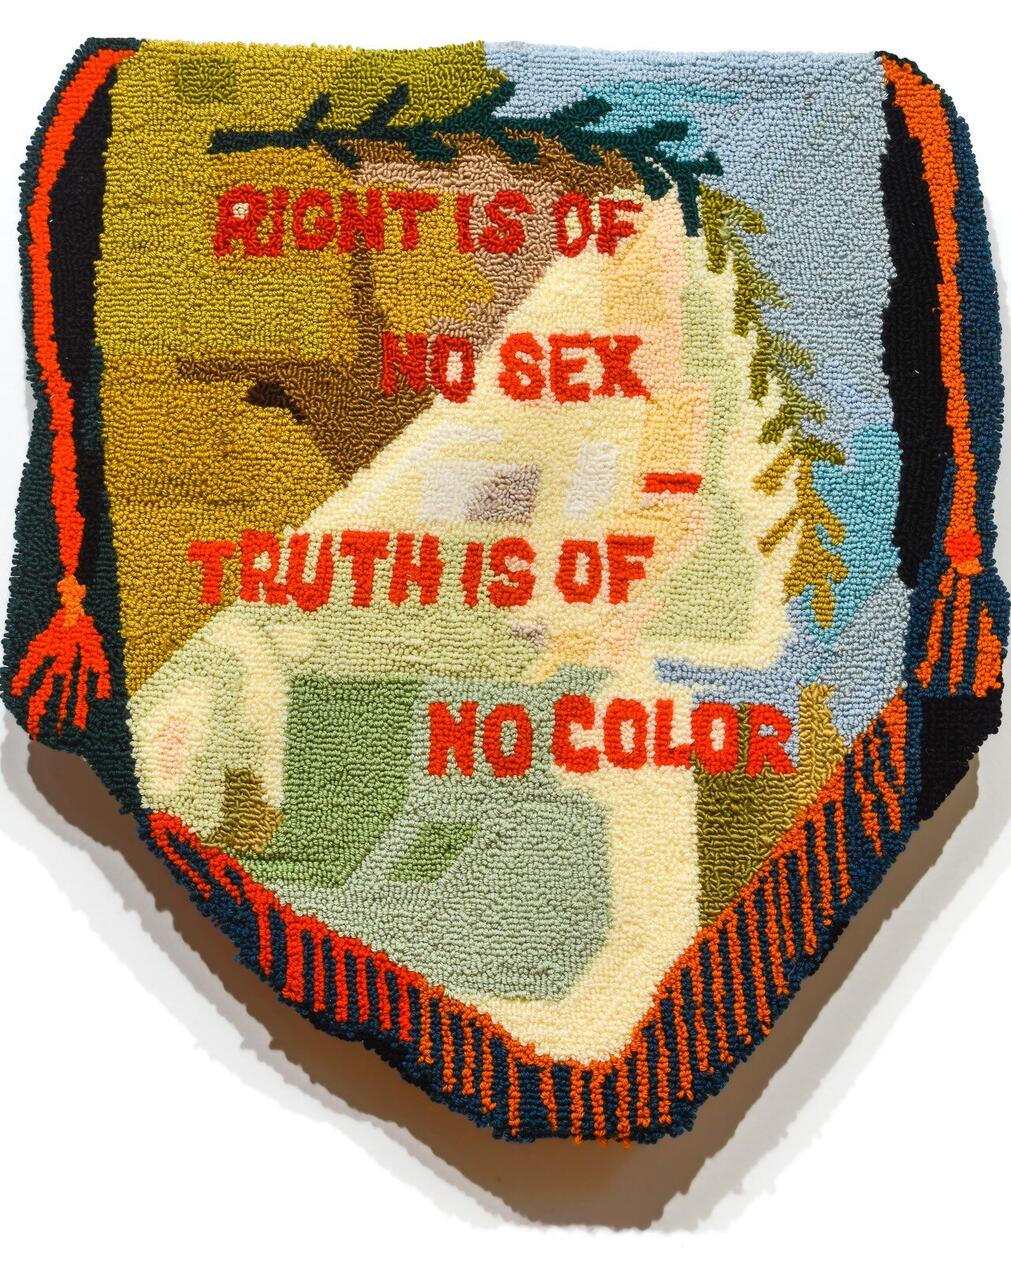 An embroidered rug with the text "RIGHT IS OF NO SEX - TRUTH IS OF NO COLOR" in red stitched writing on it.